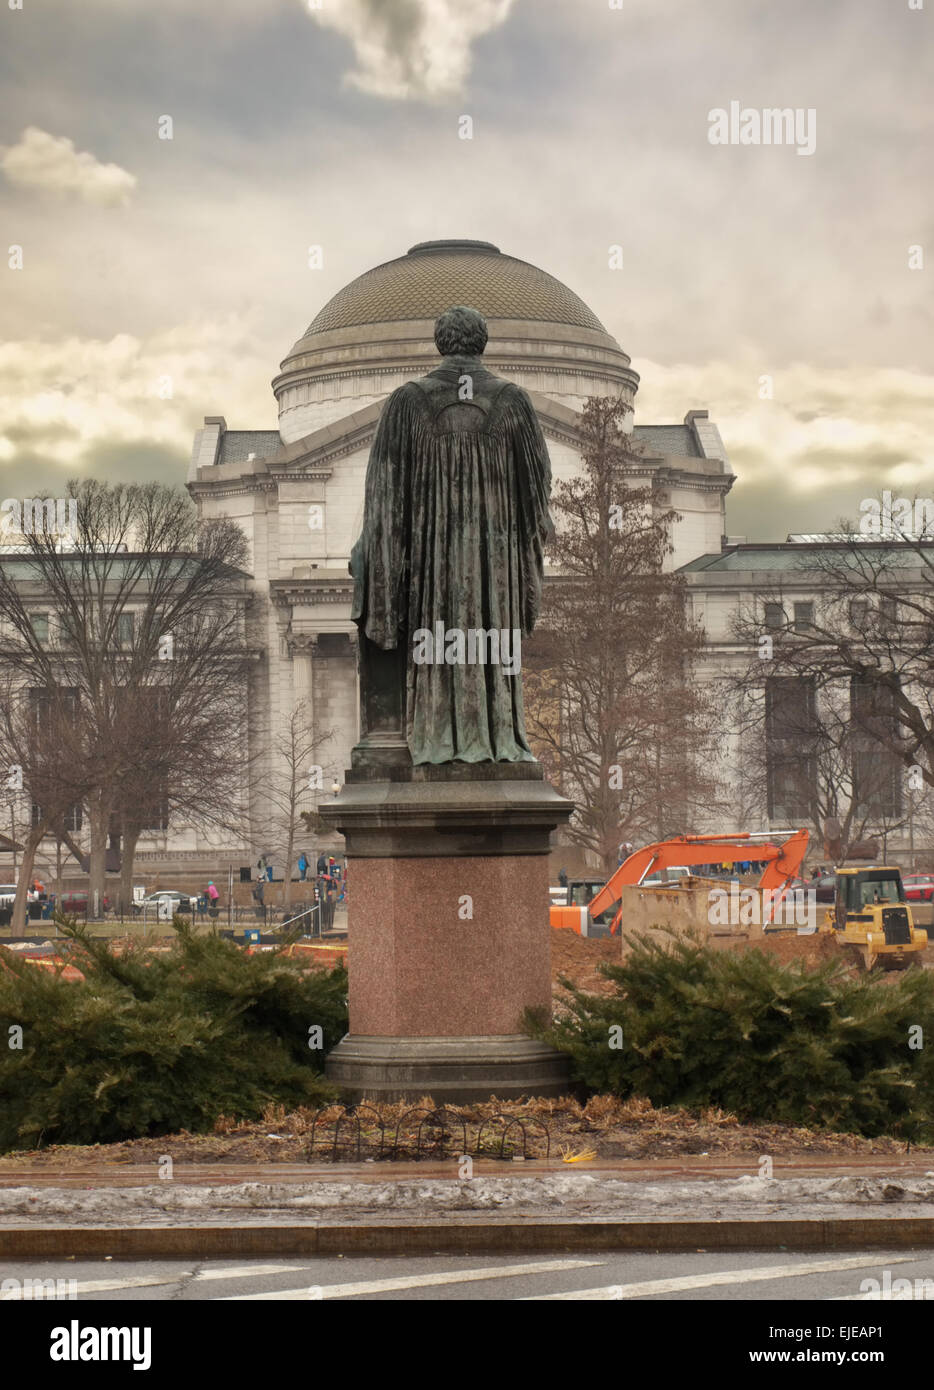 Statue of Joseph Henry overlooking the Smithsonian National Museum of Natural History across the National Mall, Washington, DC Stock Photo